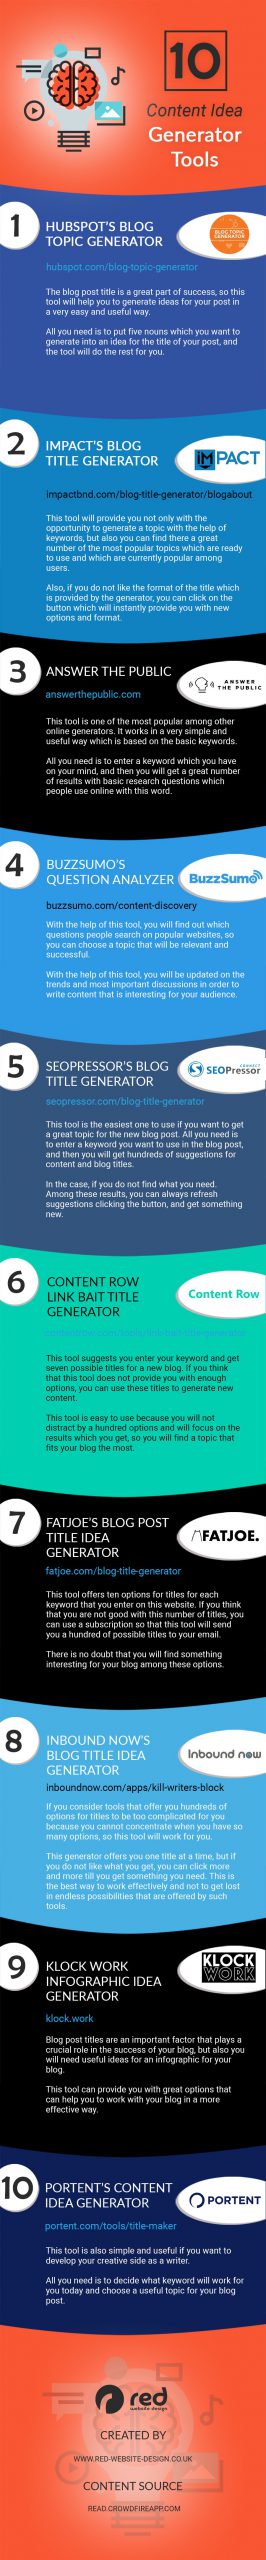 10 tools to help you generate more engaging content ideas for your blog infographic scaled 1